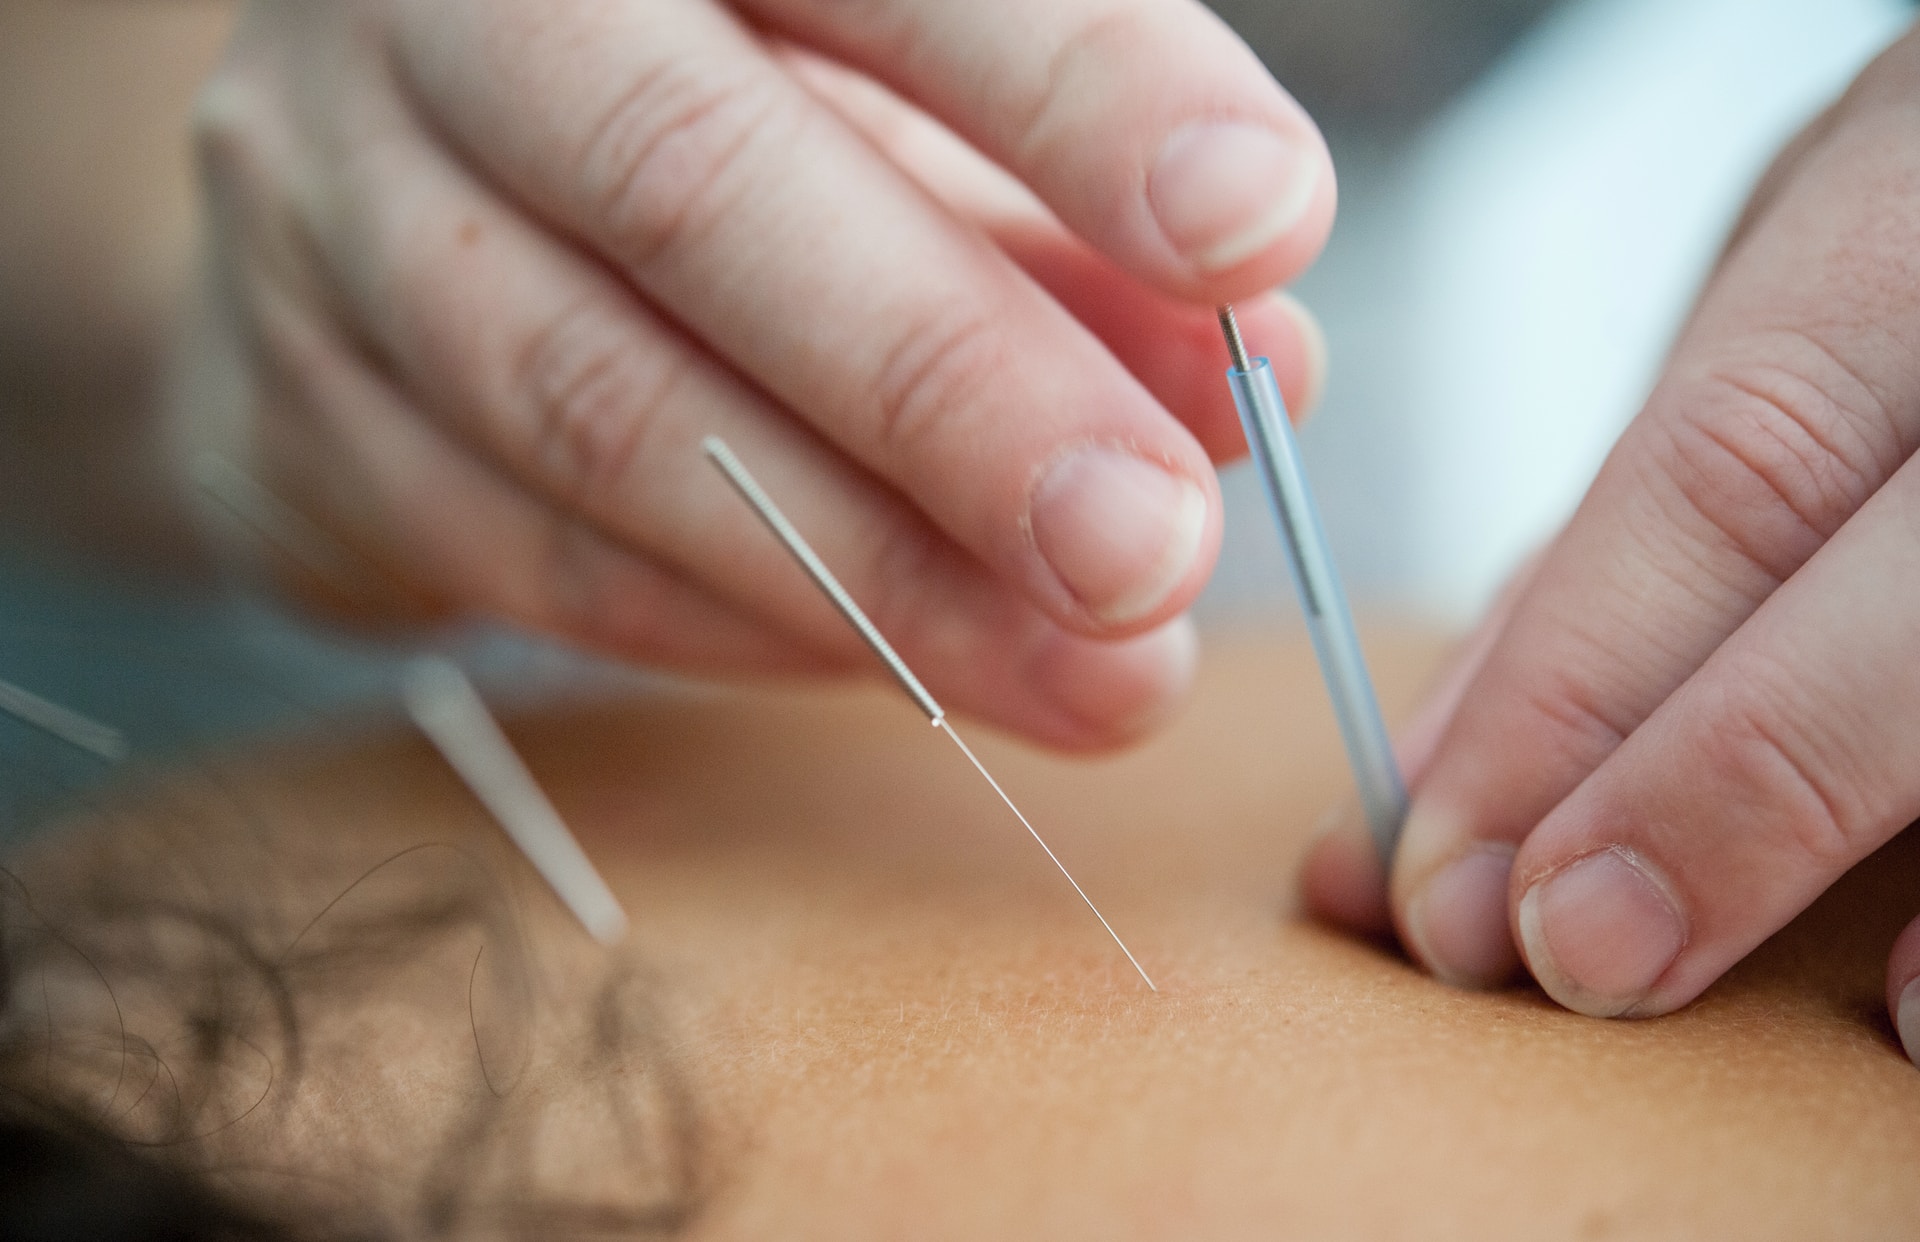 Someone receiving acupuncture treatment